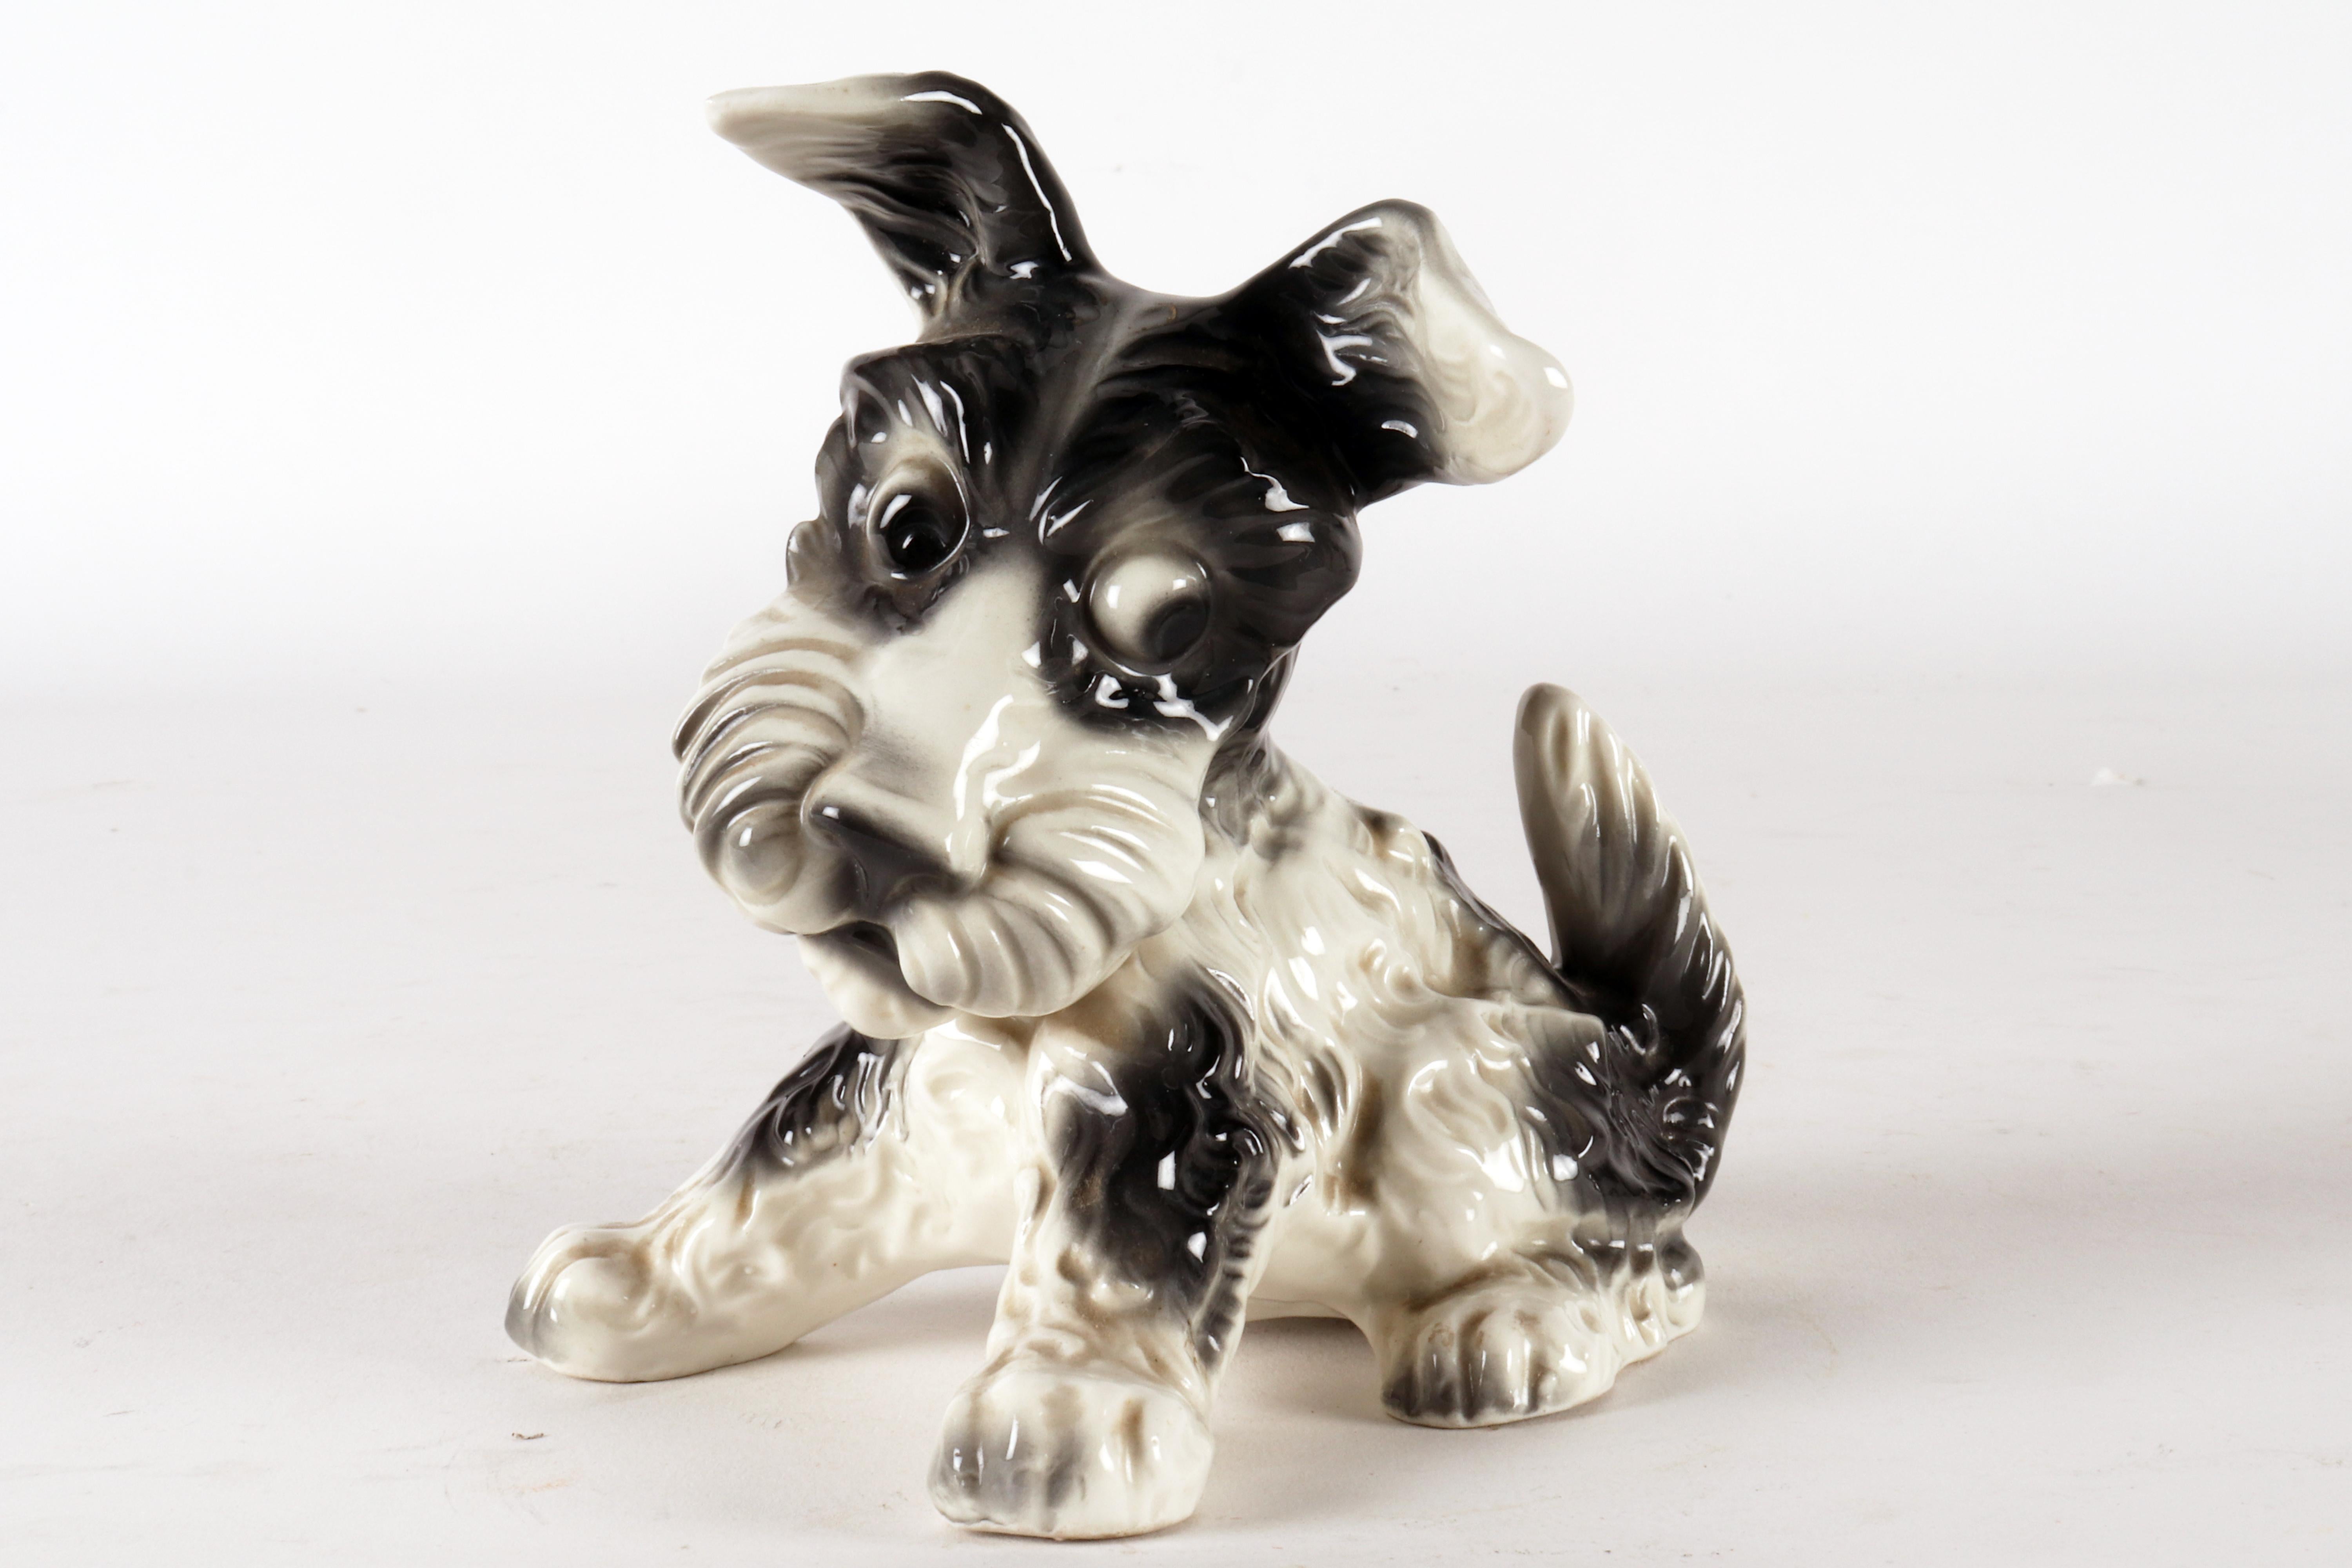 Porcelain sculpture of a Terrier dog, England Thuringia, Germany, 1940 - 1950. For Sale 4